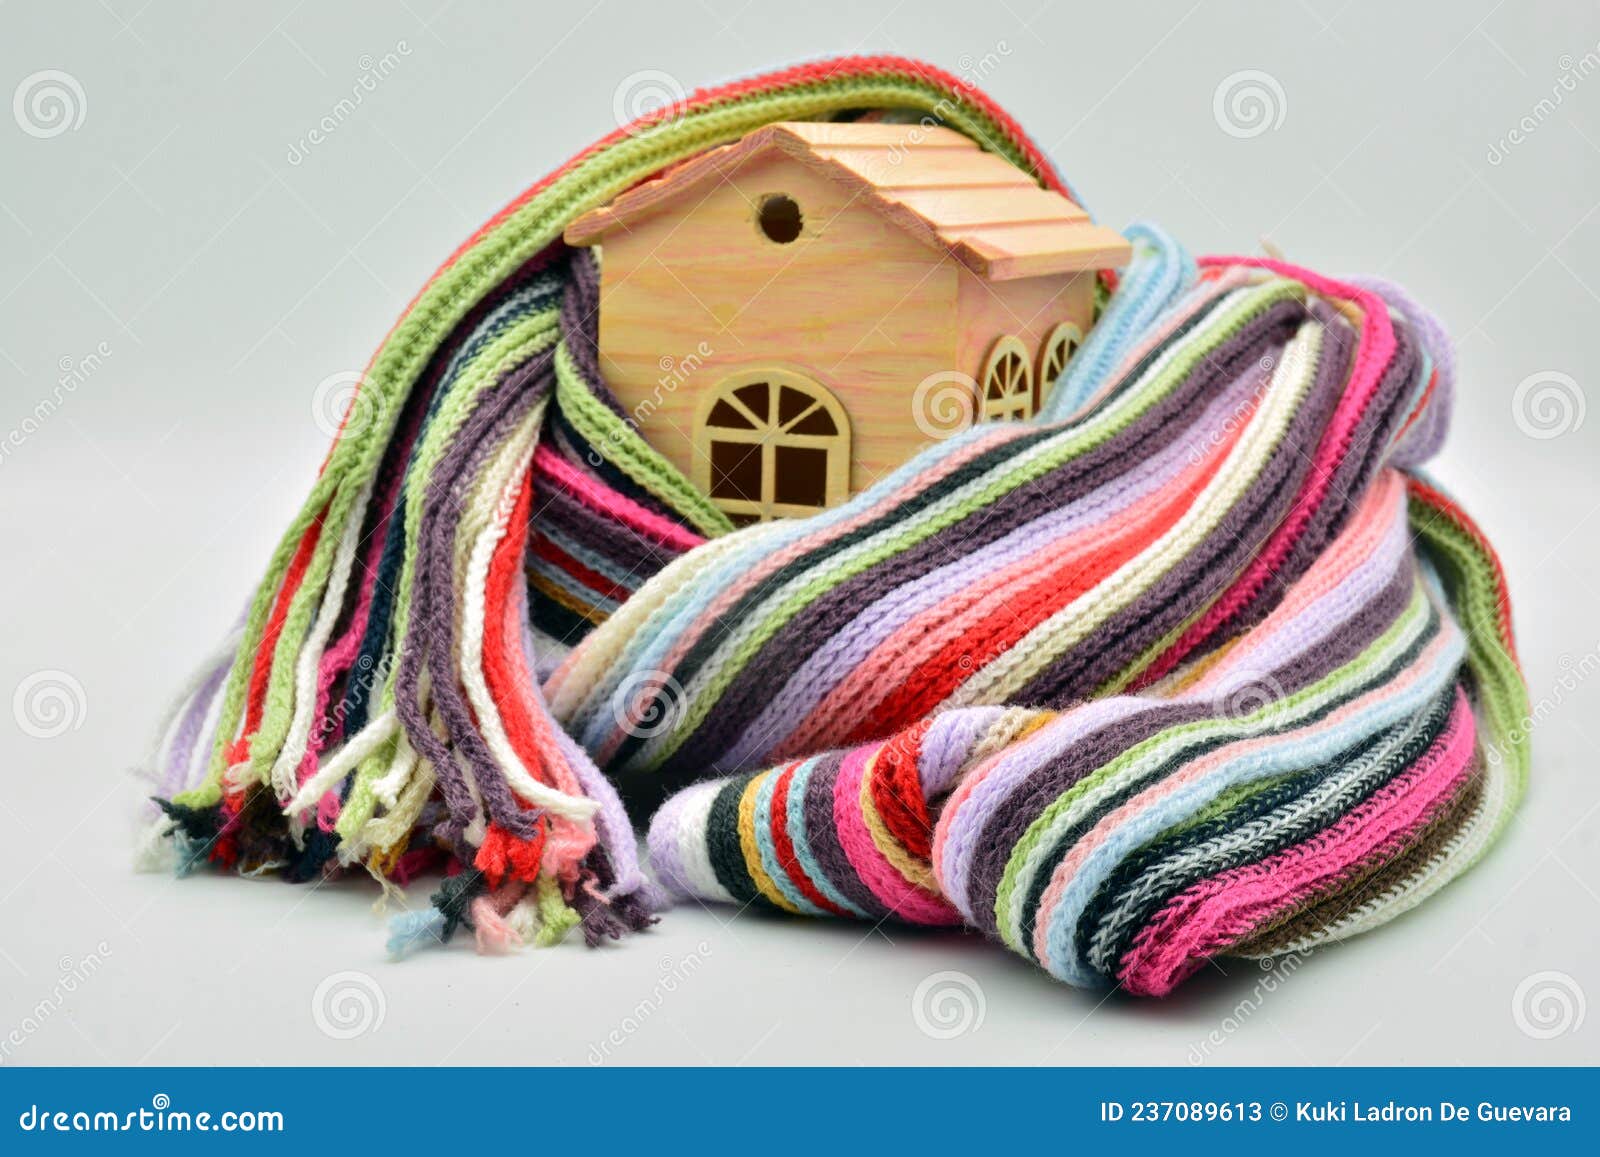 wooden house sheltered with a scarf